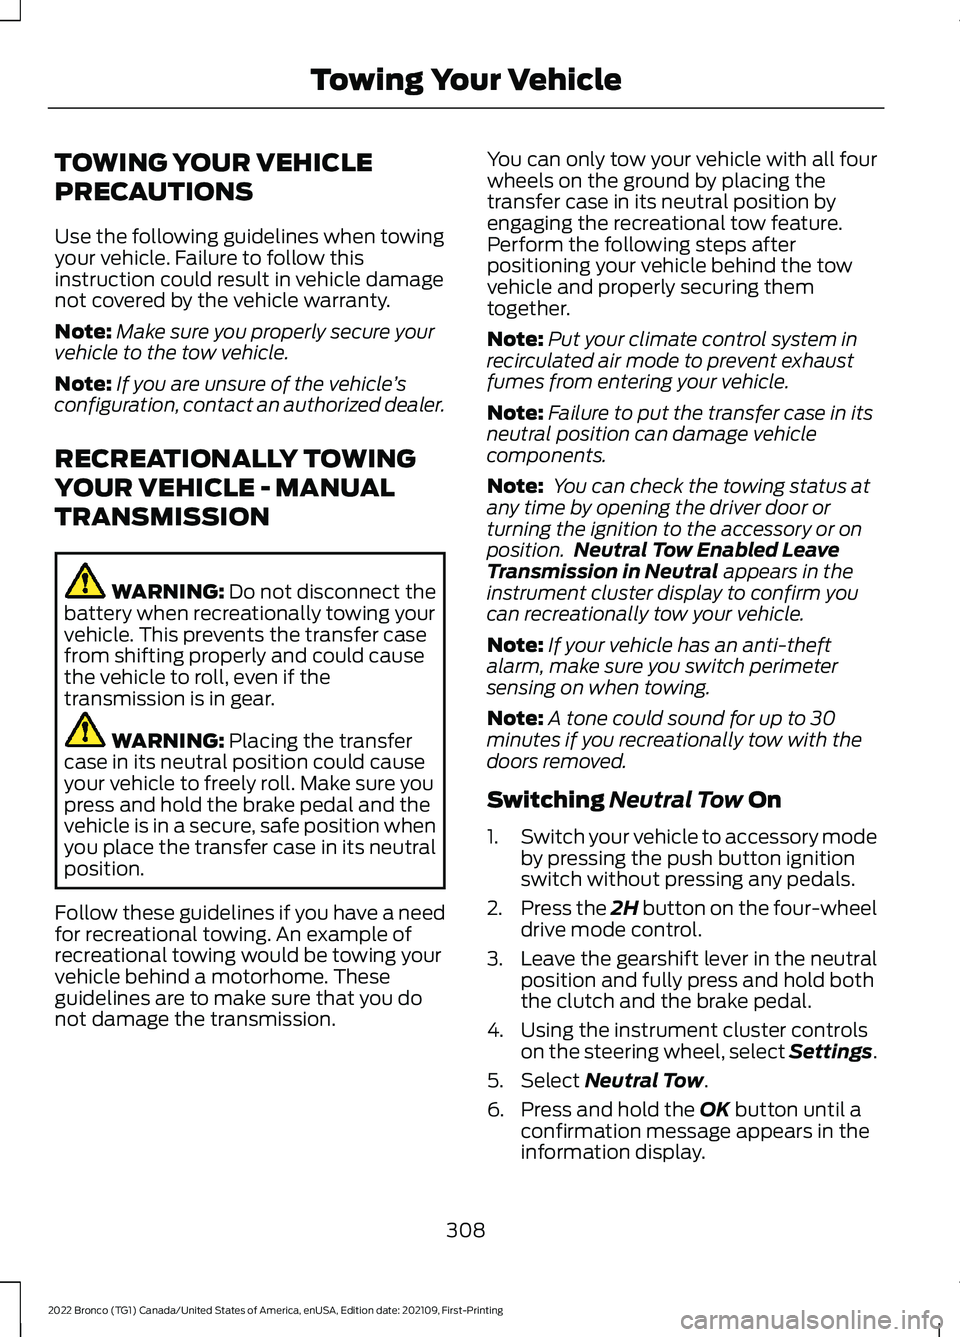 FORD BRONCO 2022  Owners Manual TOWING YOUR VEHICLE
PRECAUTIONS
Use the following guidelines when towingyour vehicle. Failure to follow thisinstruction could result in vehicle damagenot covered by the vehicle warranty.
Note:Make sur